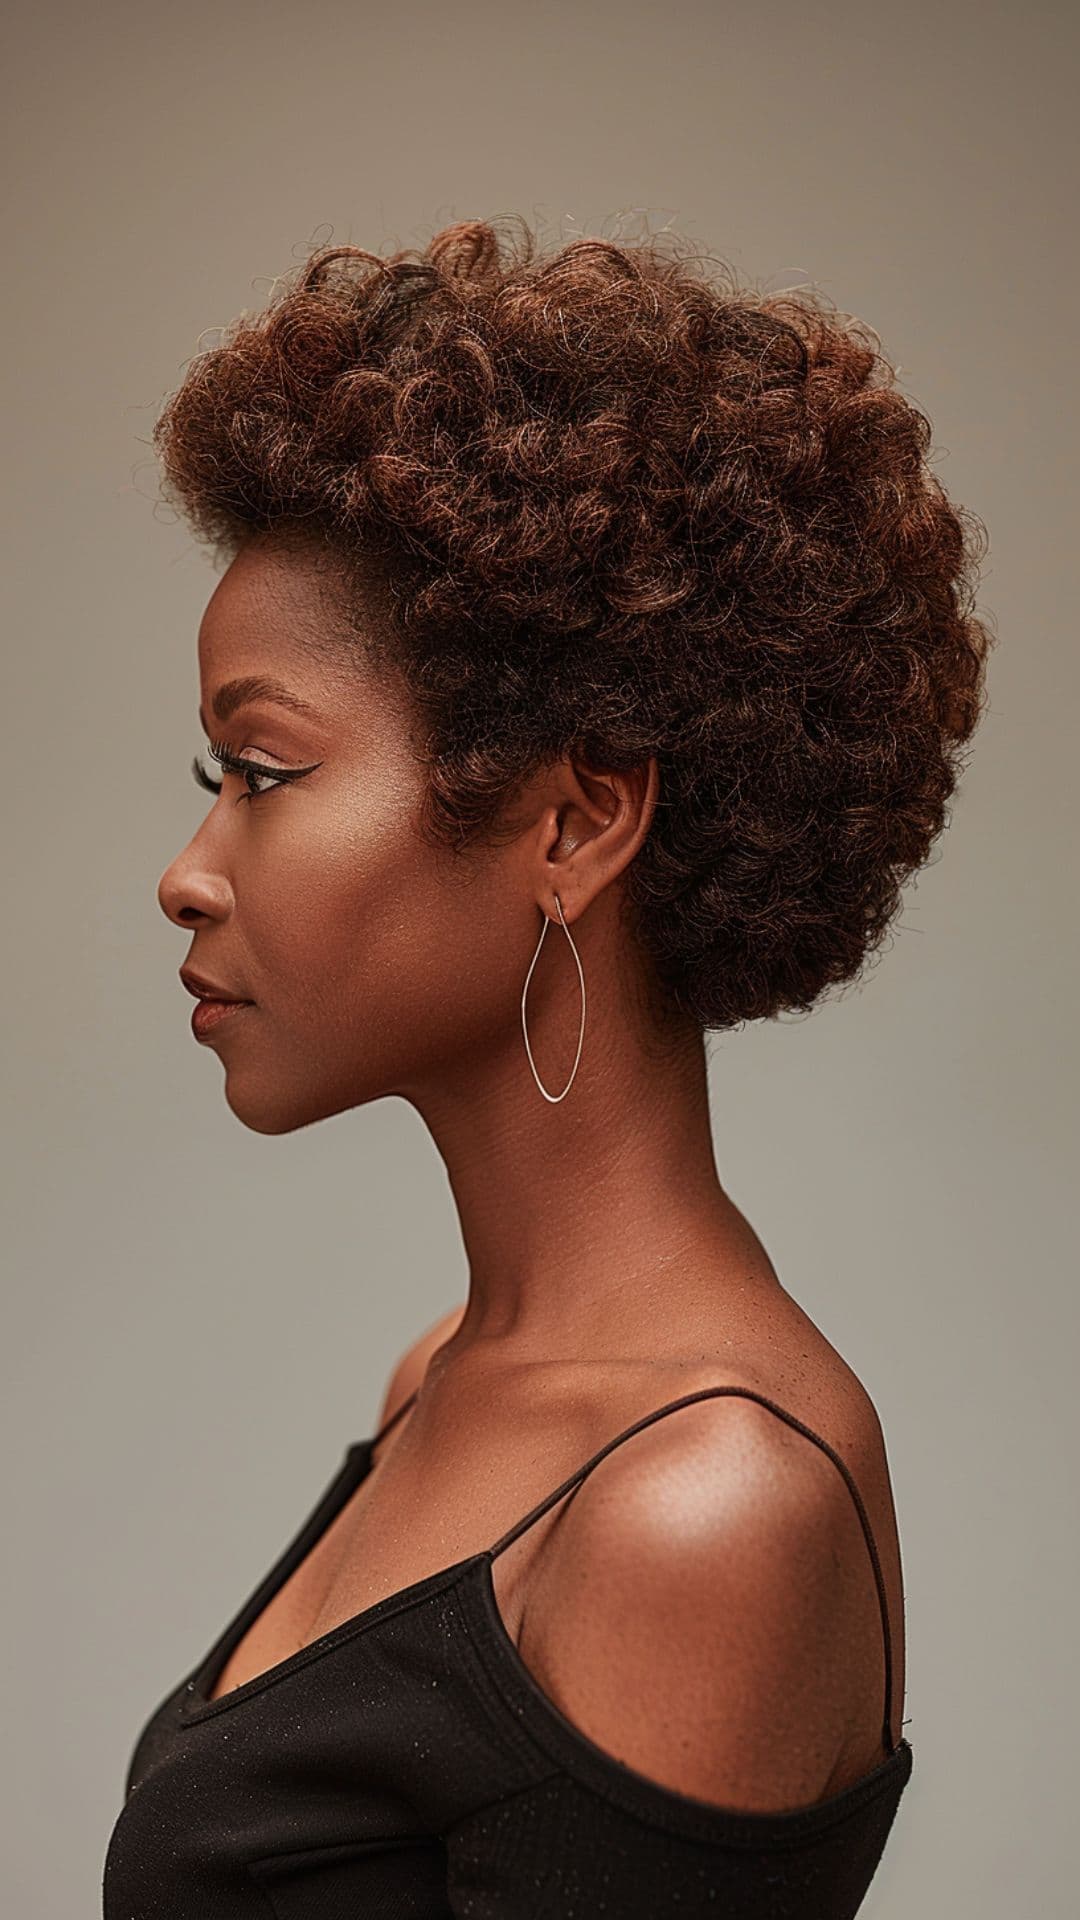 An older black woman modelling a classic short afro hairstyle.